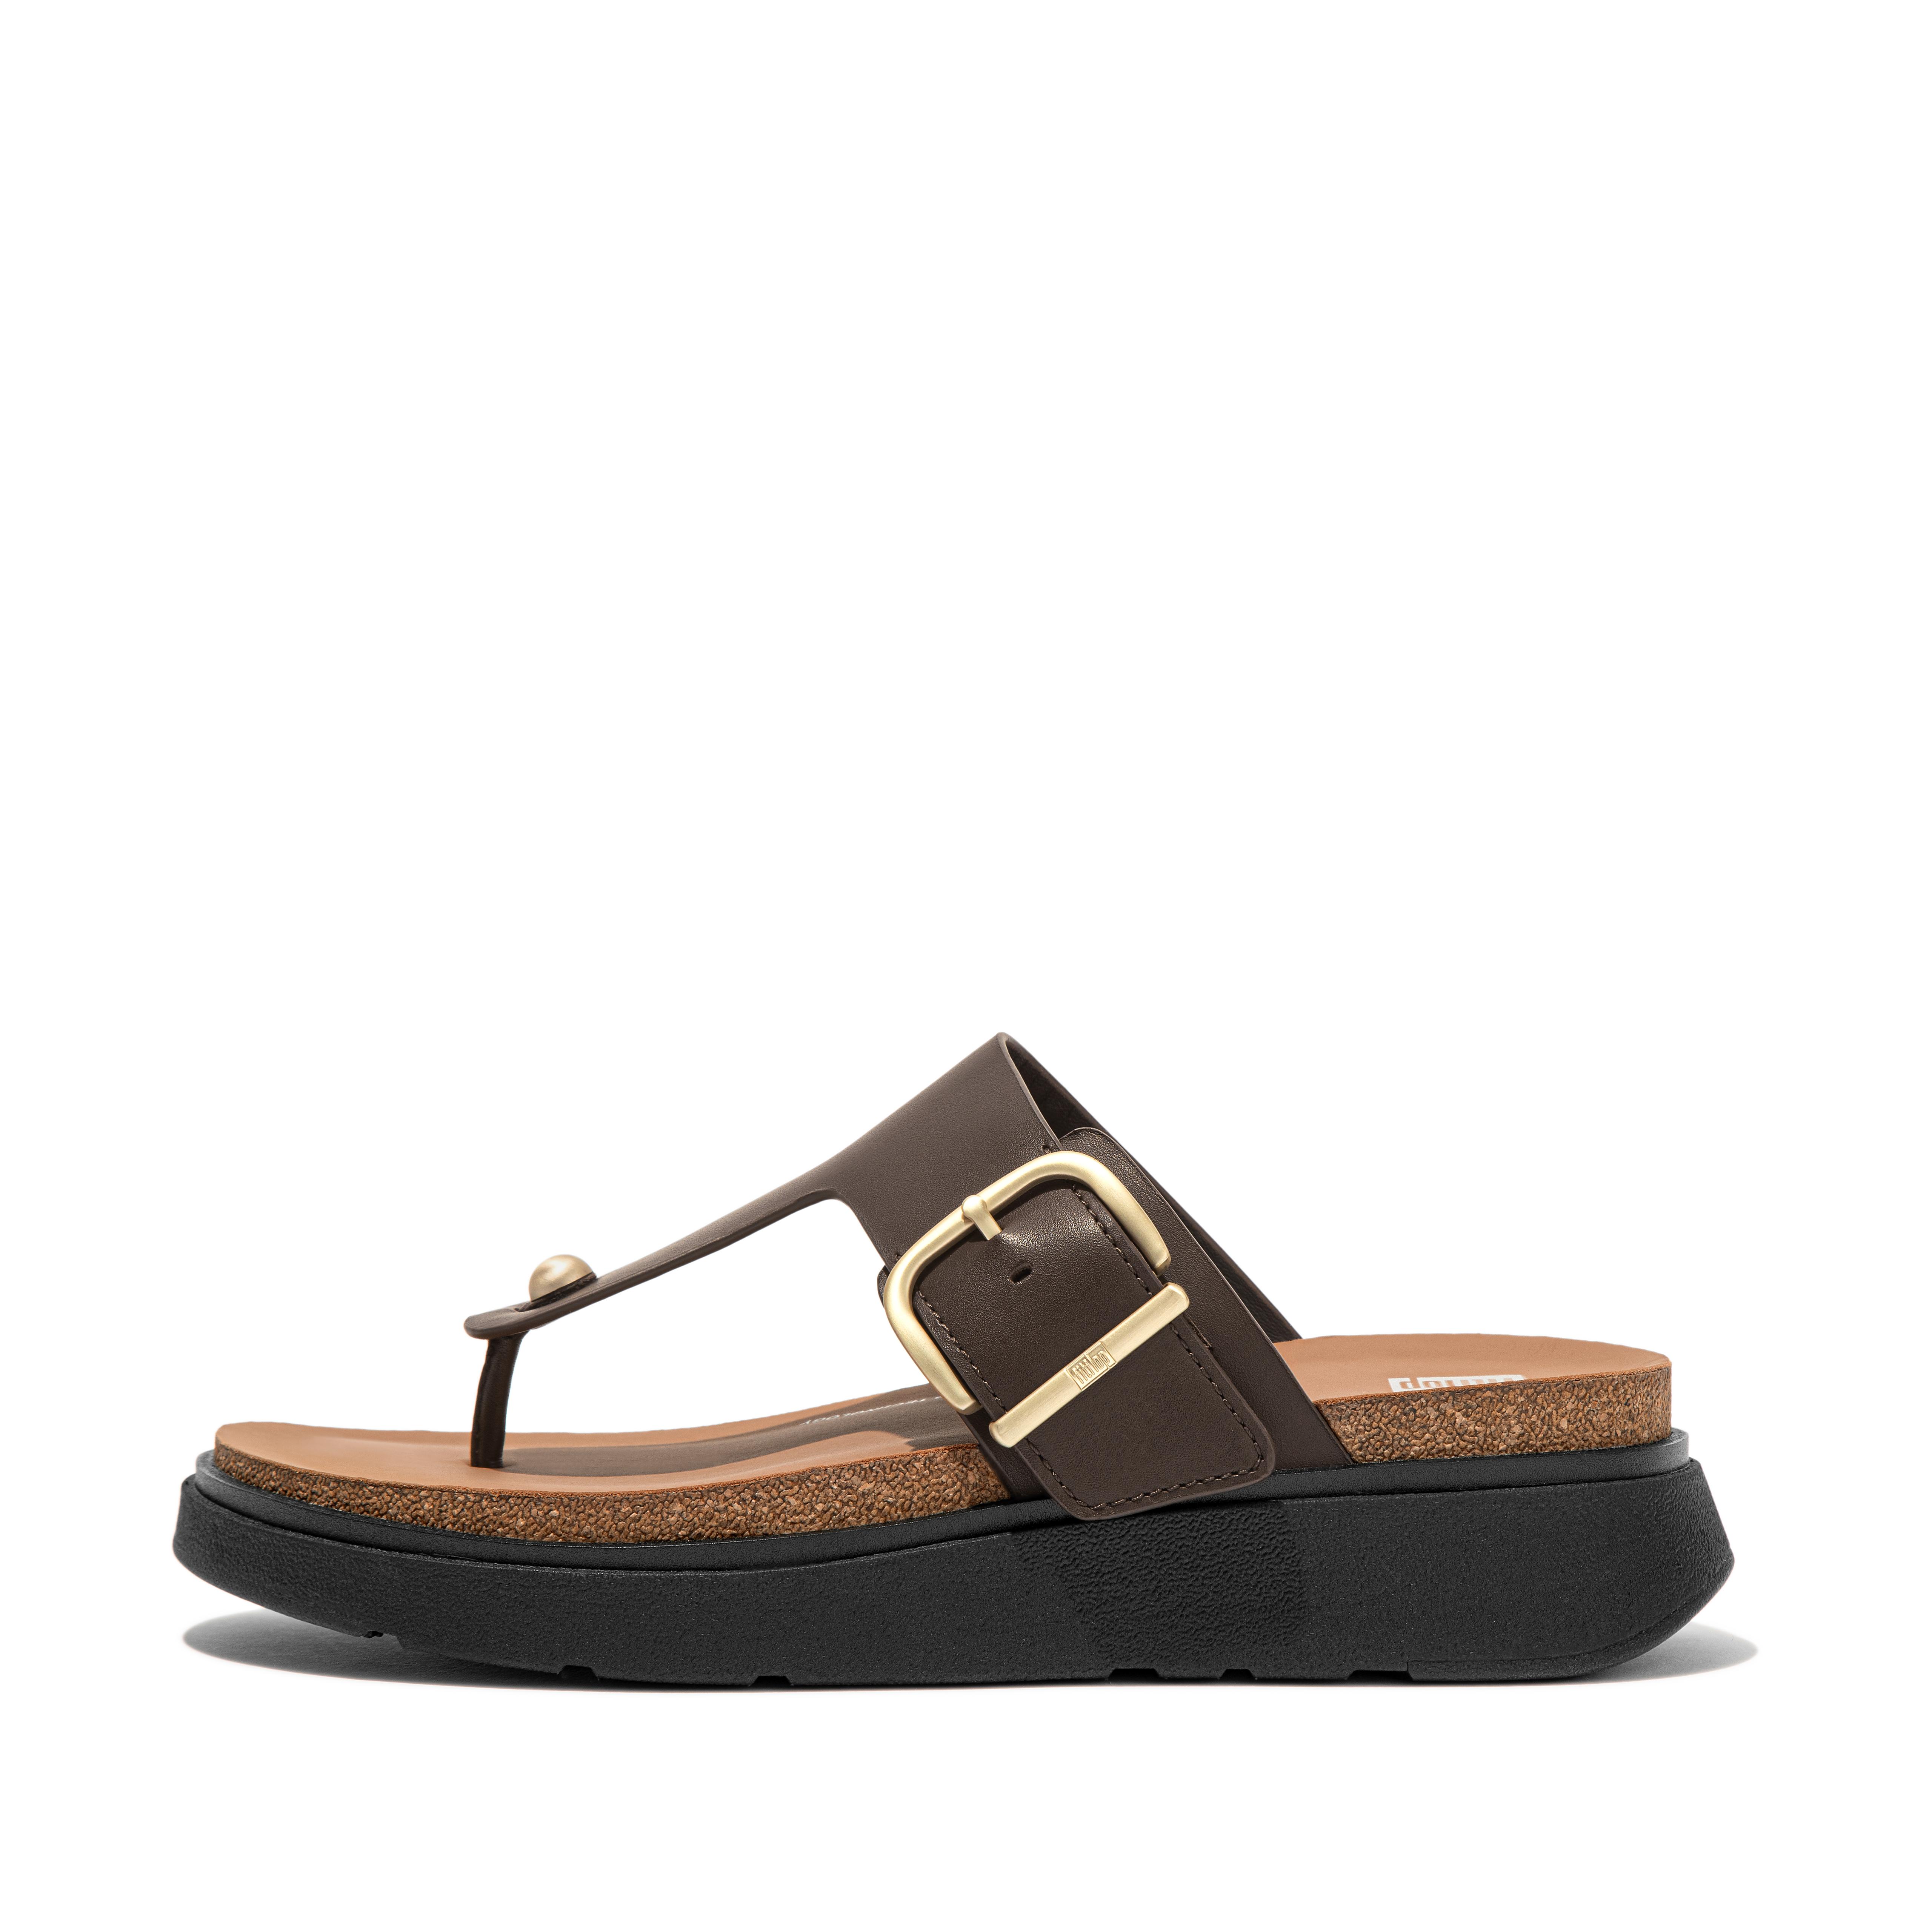 Fitflop Buckle Leather Toe-Post Sandals,Brown Mix